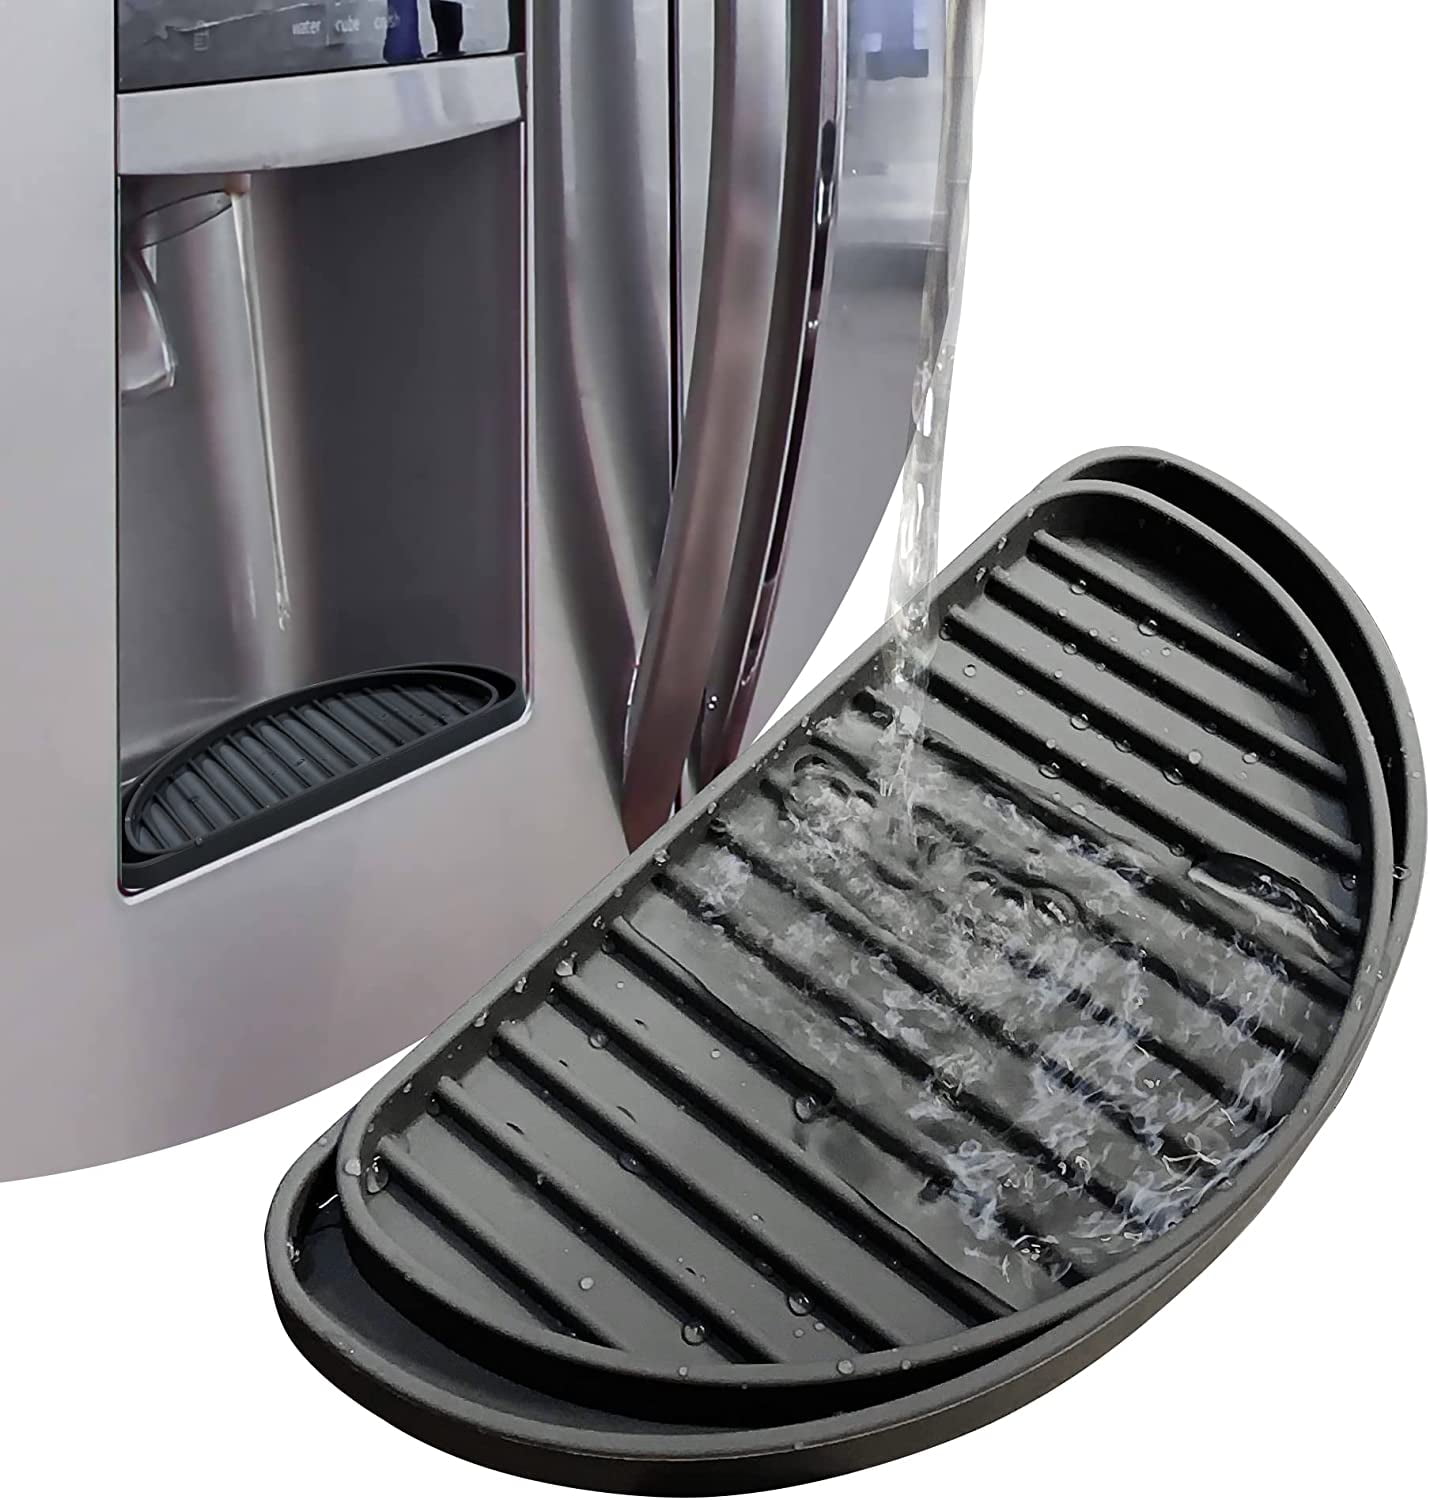 Get BIG Spill Preventing with our Mini Fridge Drip Pan 